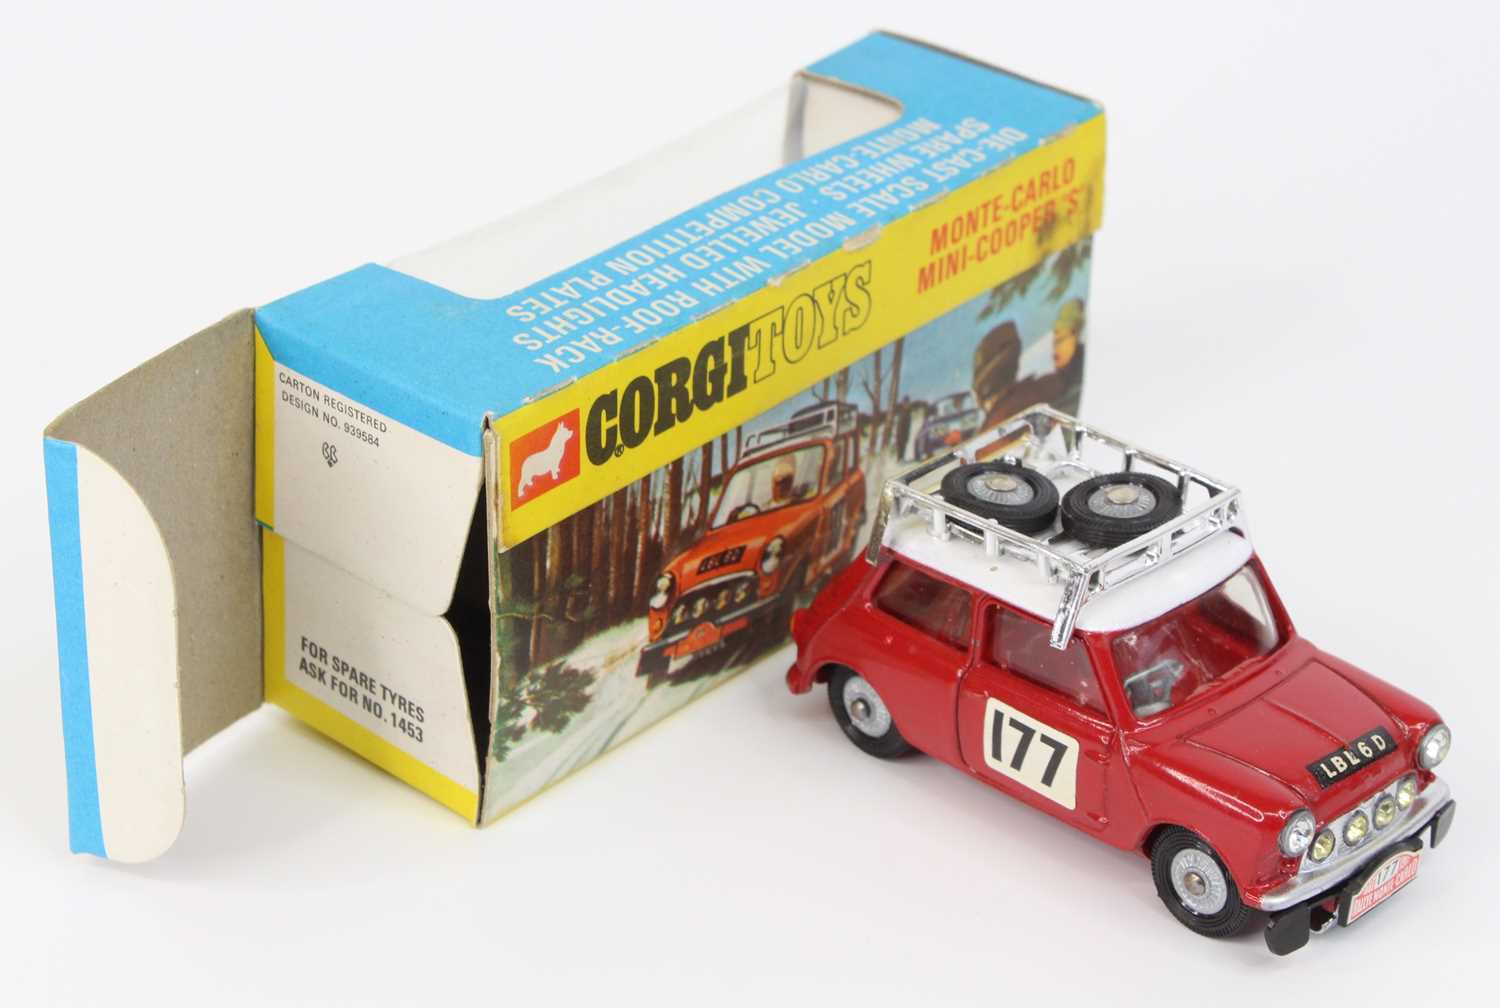 Corgi Toys, 339 Mini Cooper S Monte Carlo Winner, red body with white roof, racing number 177, 2 - Image 3 of 4